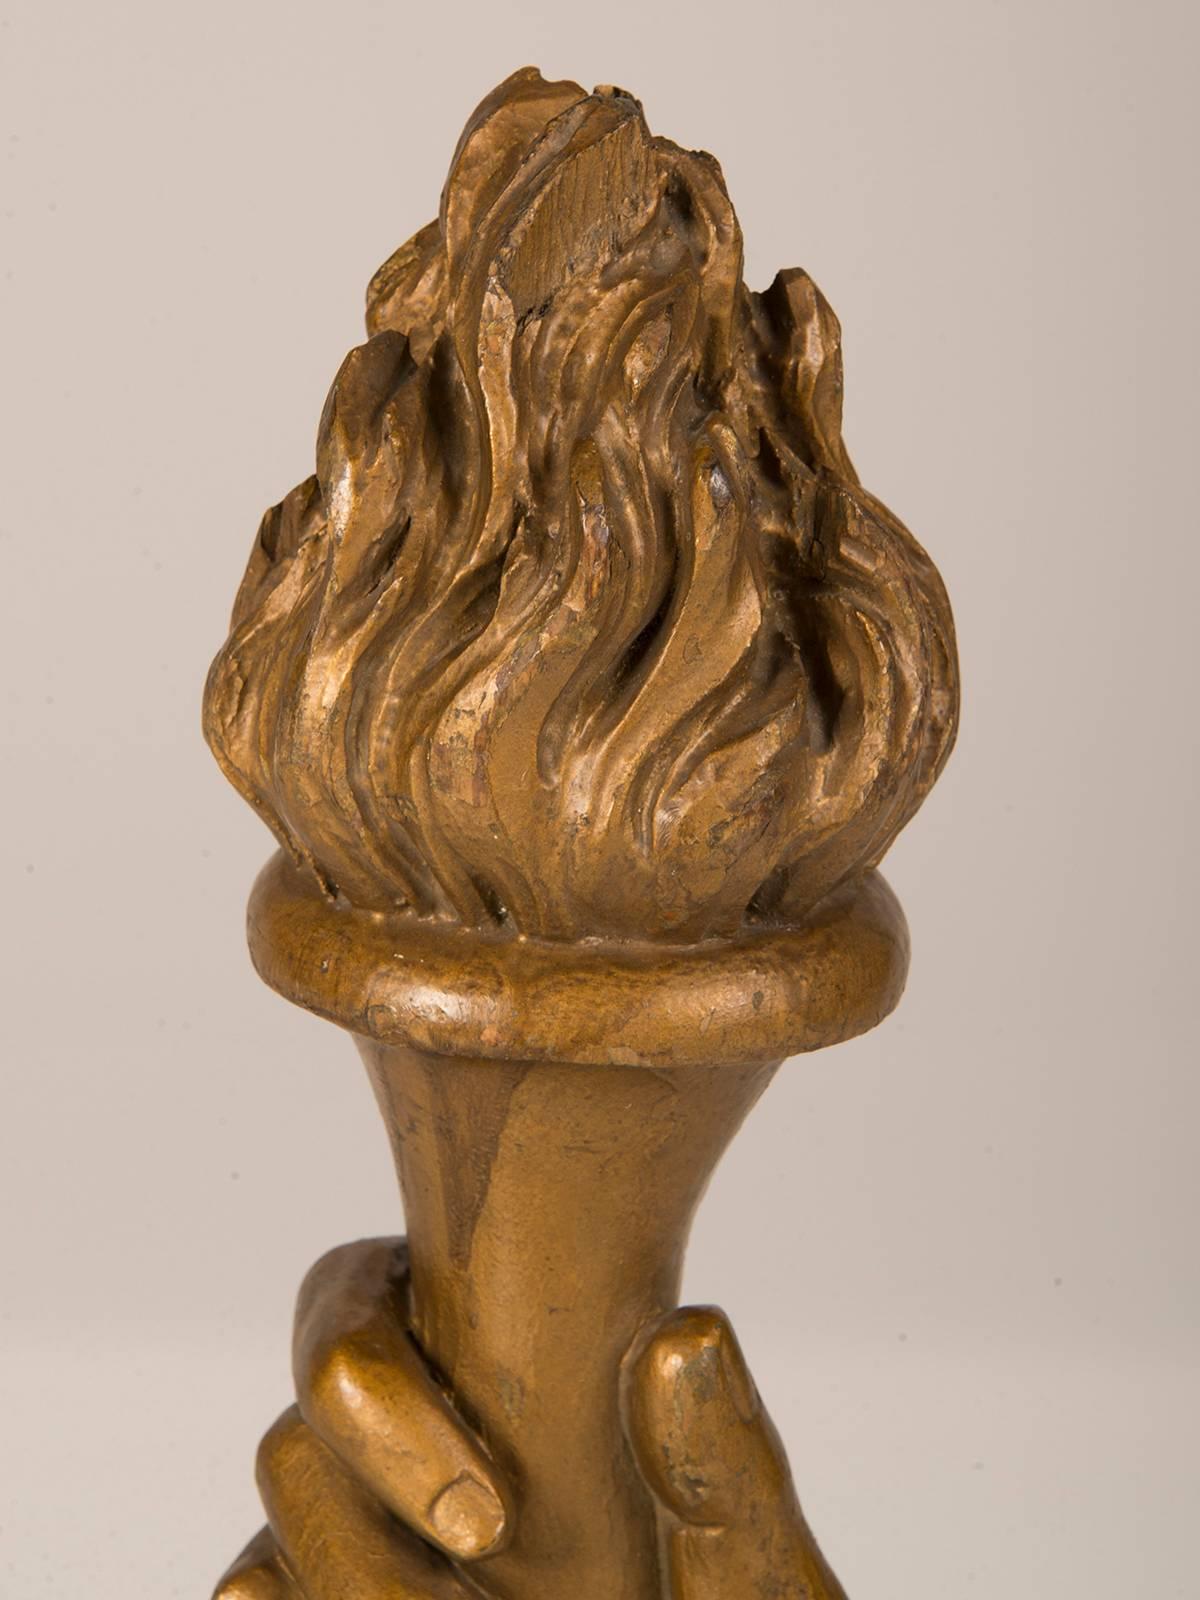 Be the first to see our new arrivals directly through 1stdibs! Please click follow dealer below. 

A wonderful carved and gilded wood sculpture of a hand holding aloft a flaming torch from France, circa 1885. Please notice the resemblance to the